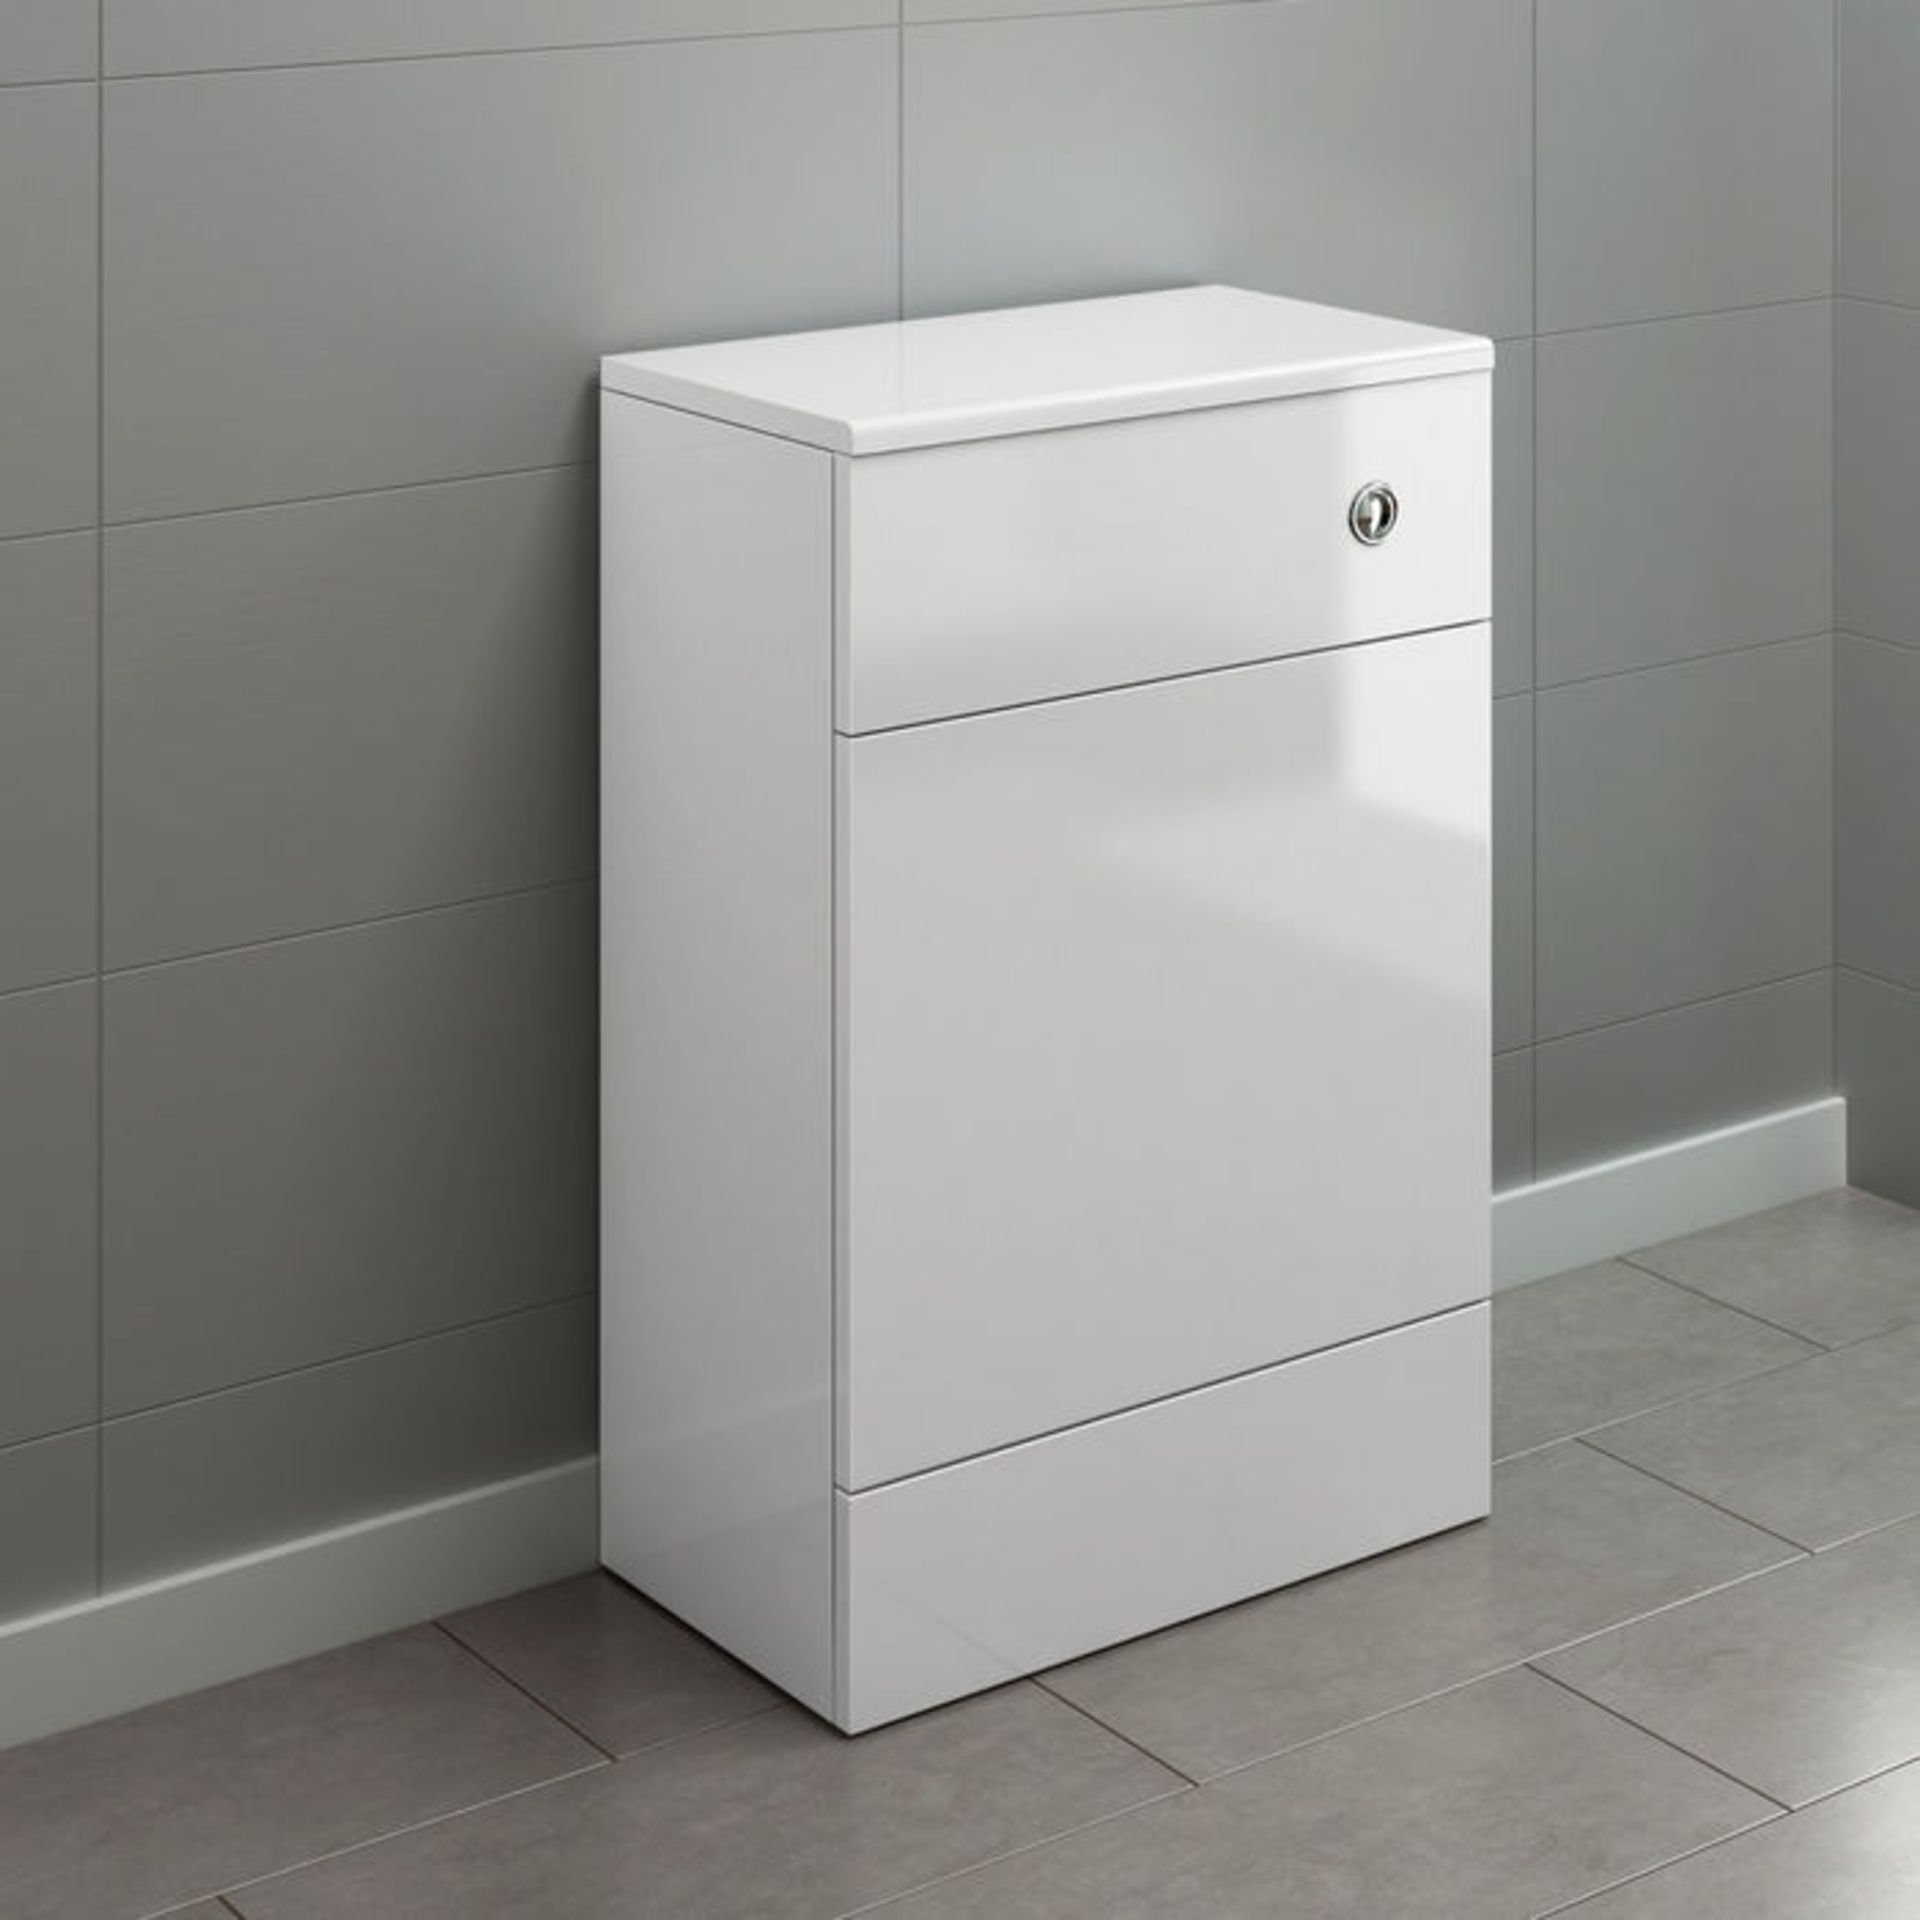 (H22) 500mm Harper Gloss White Back To Wall Toilet Unit RRP £174.99 Our discreet unit cleverly